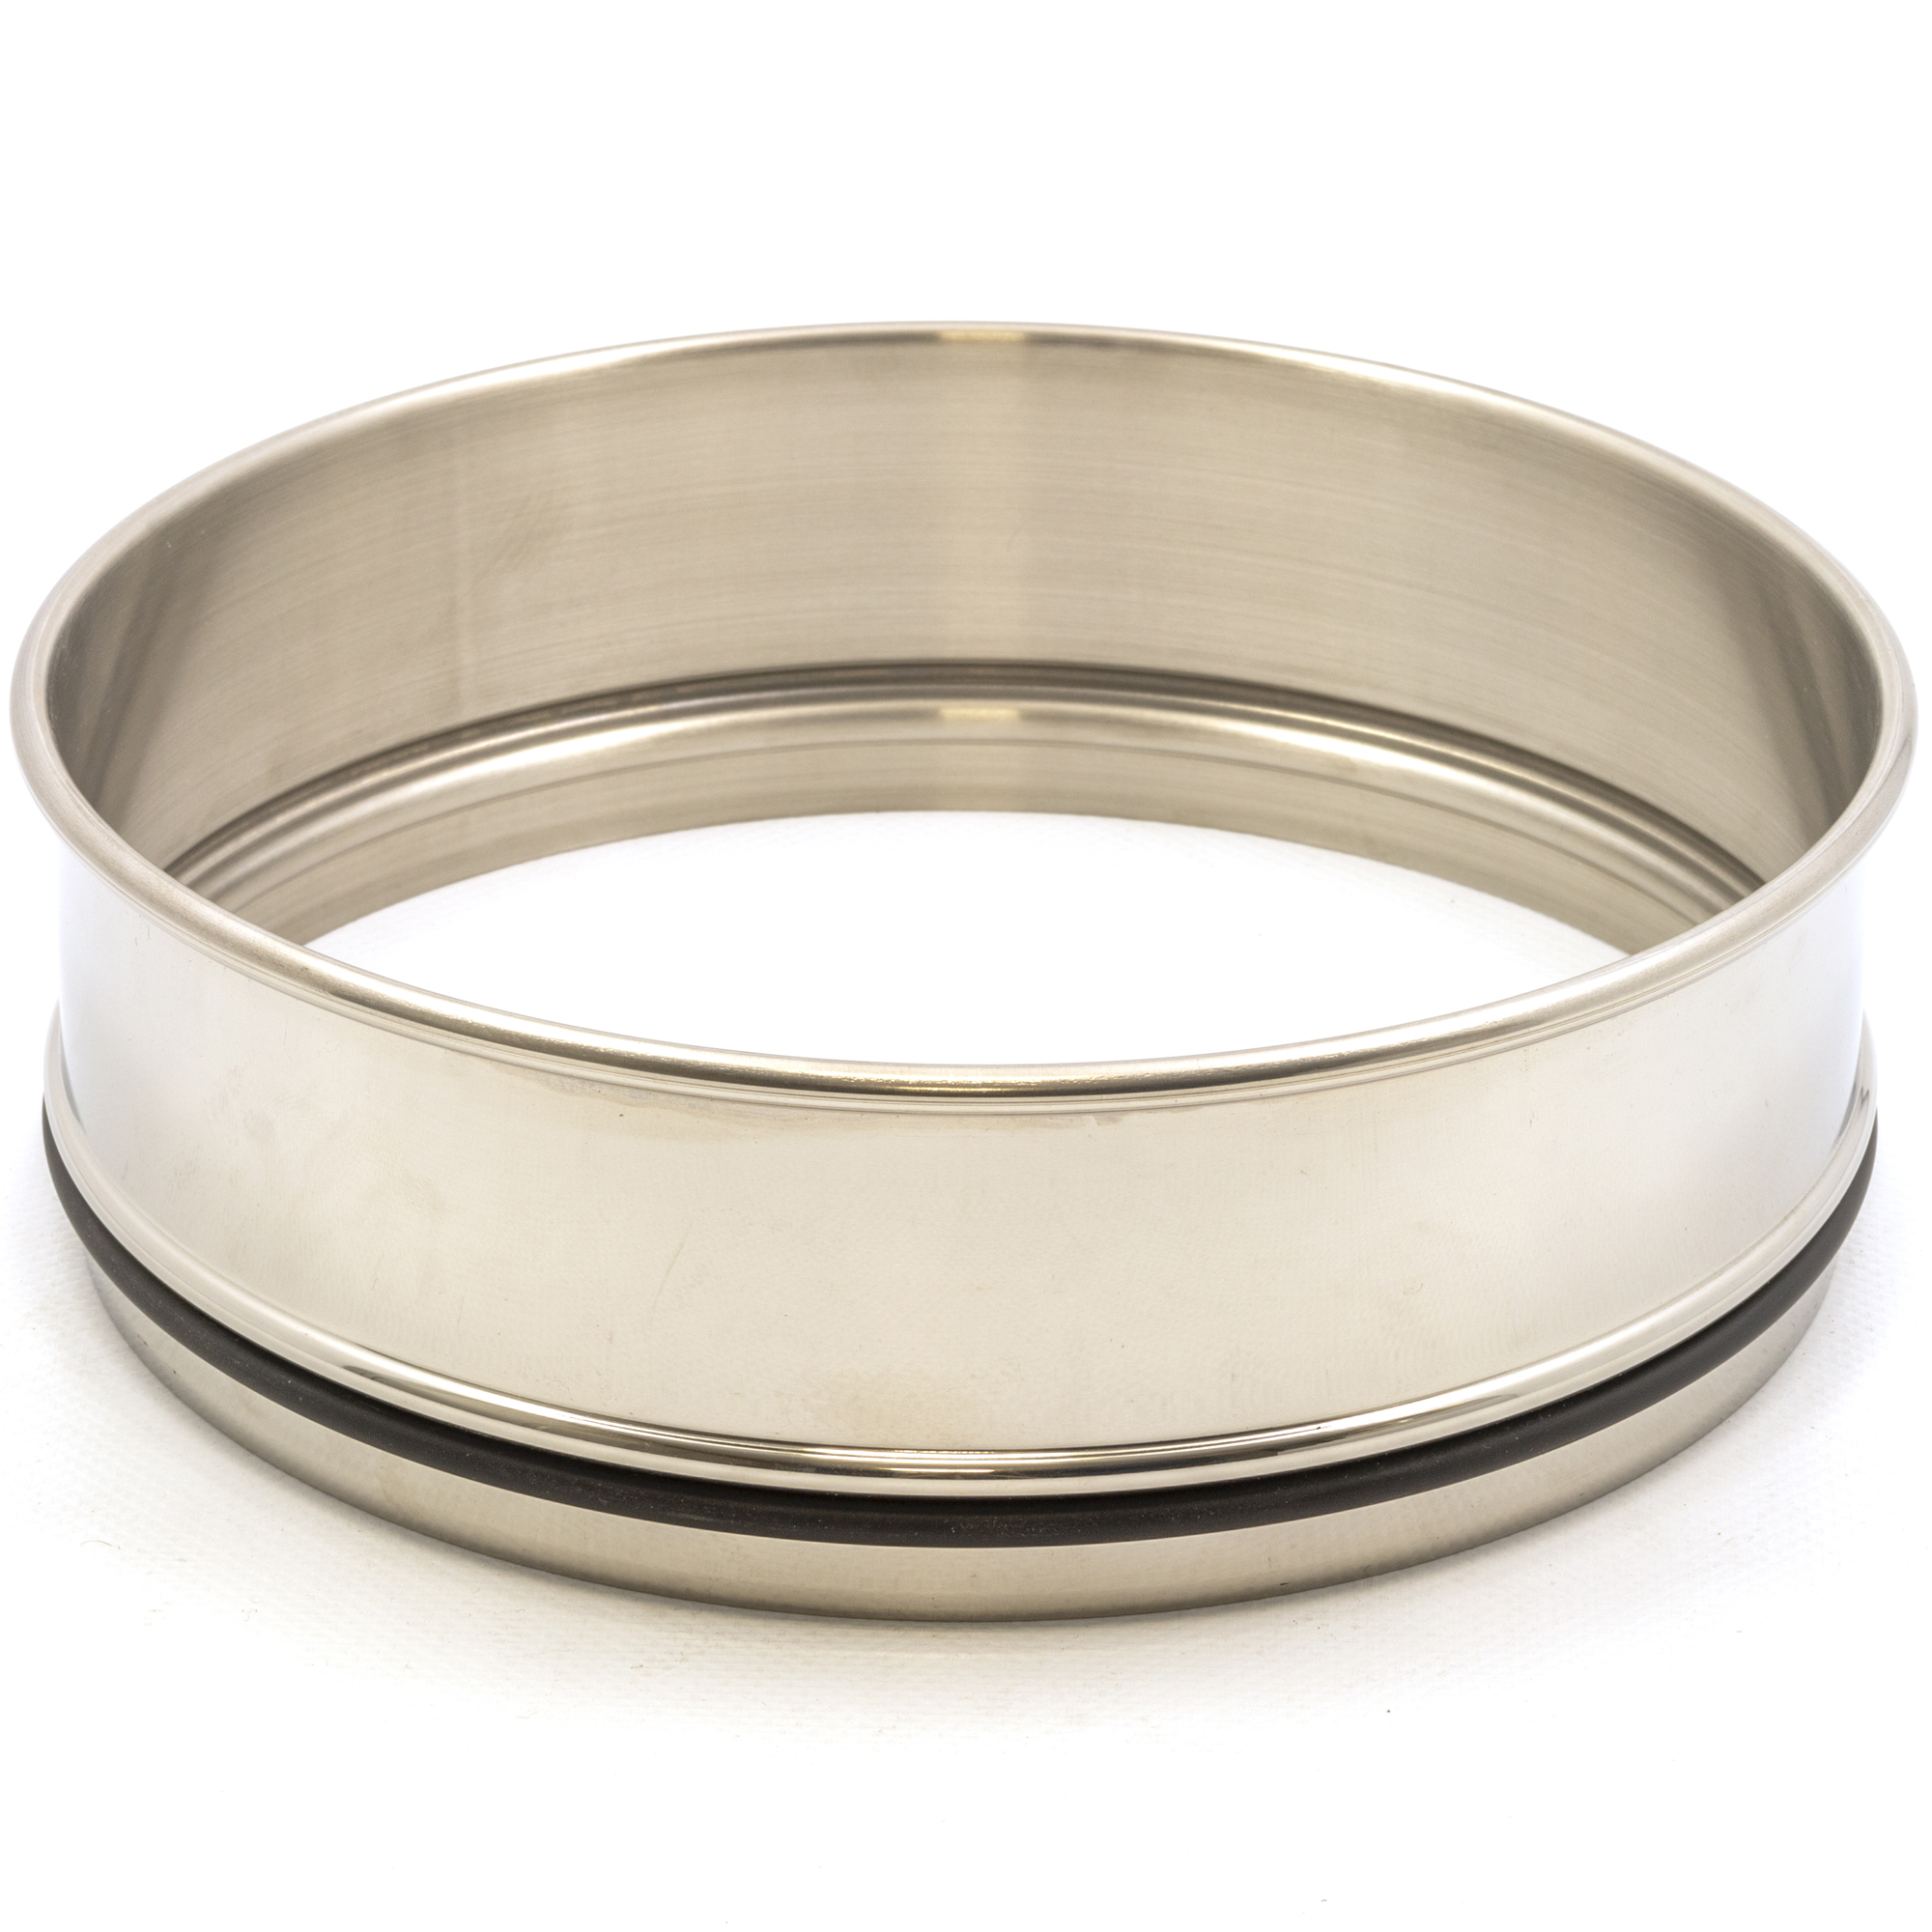 HAVE 206762702 Intermediate ring for 450x70mm sieves